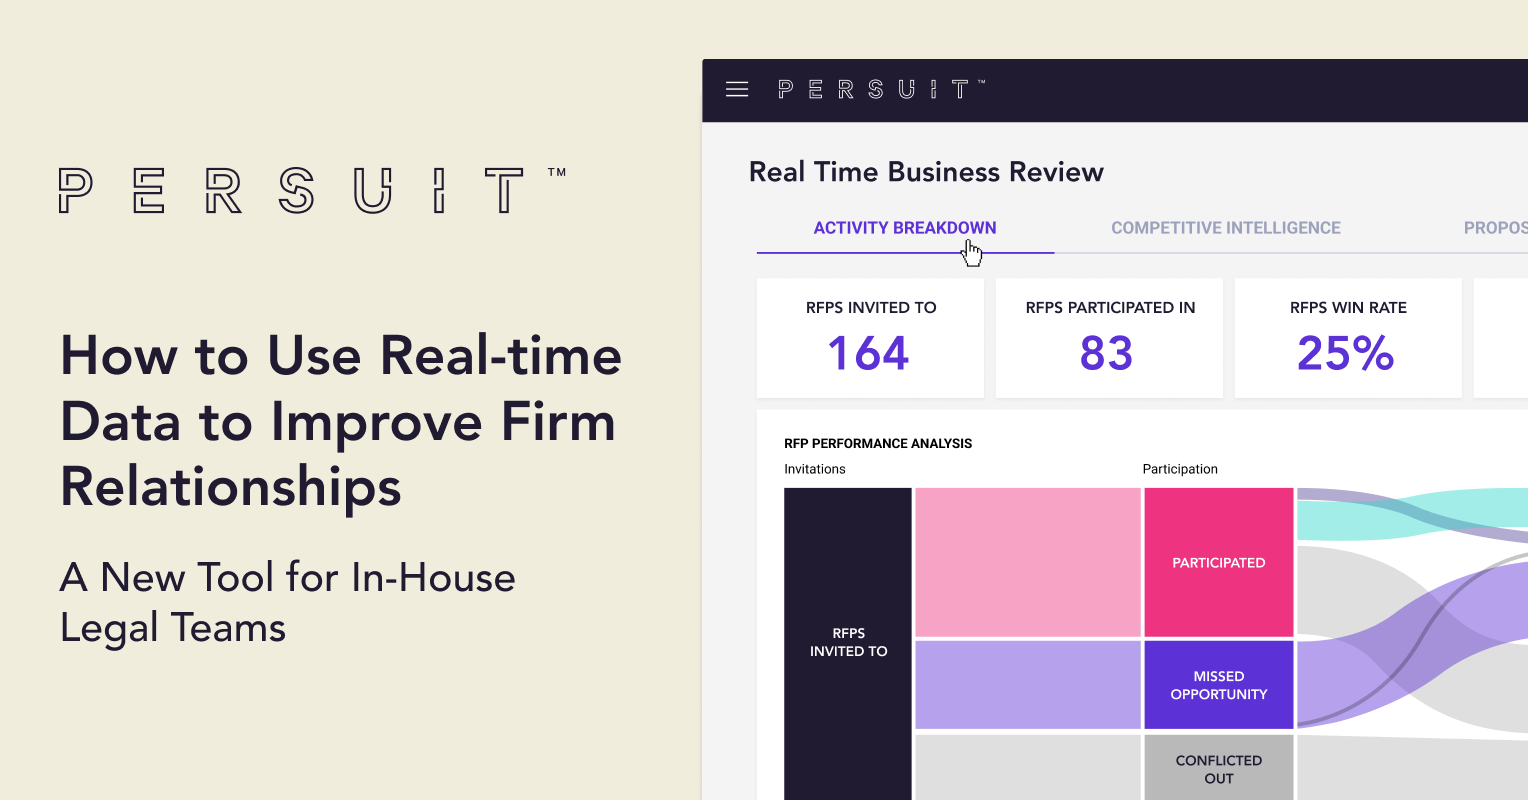 Real-time Business Reviews: How Real-time Data Improves Firm Relationships